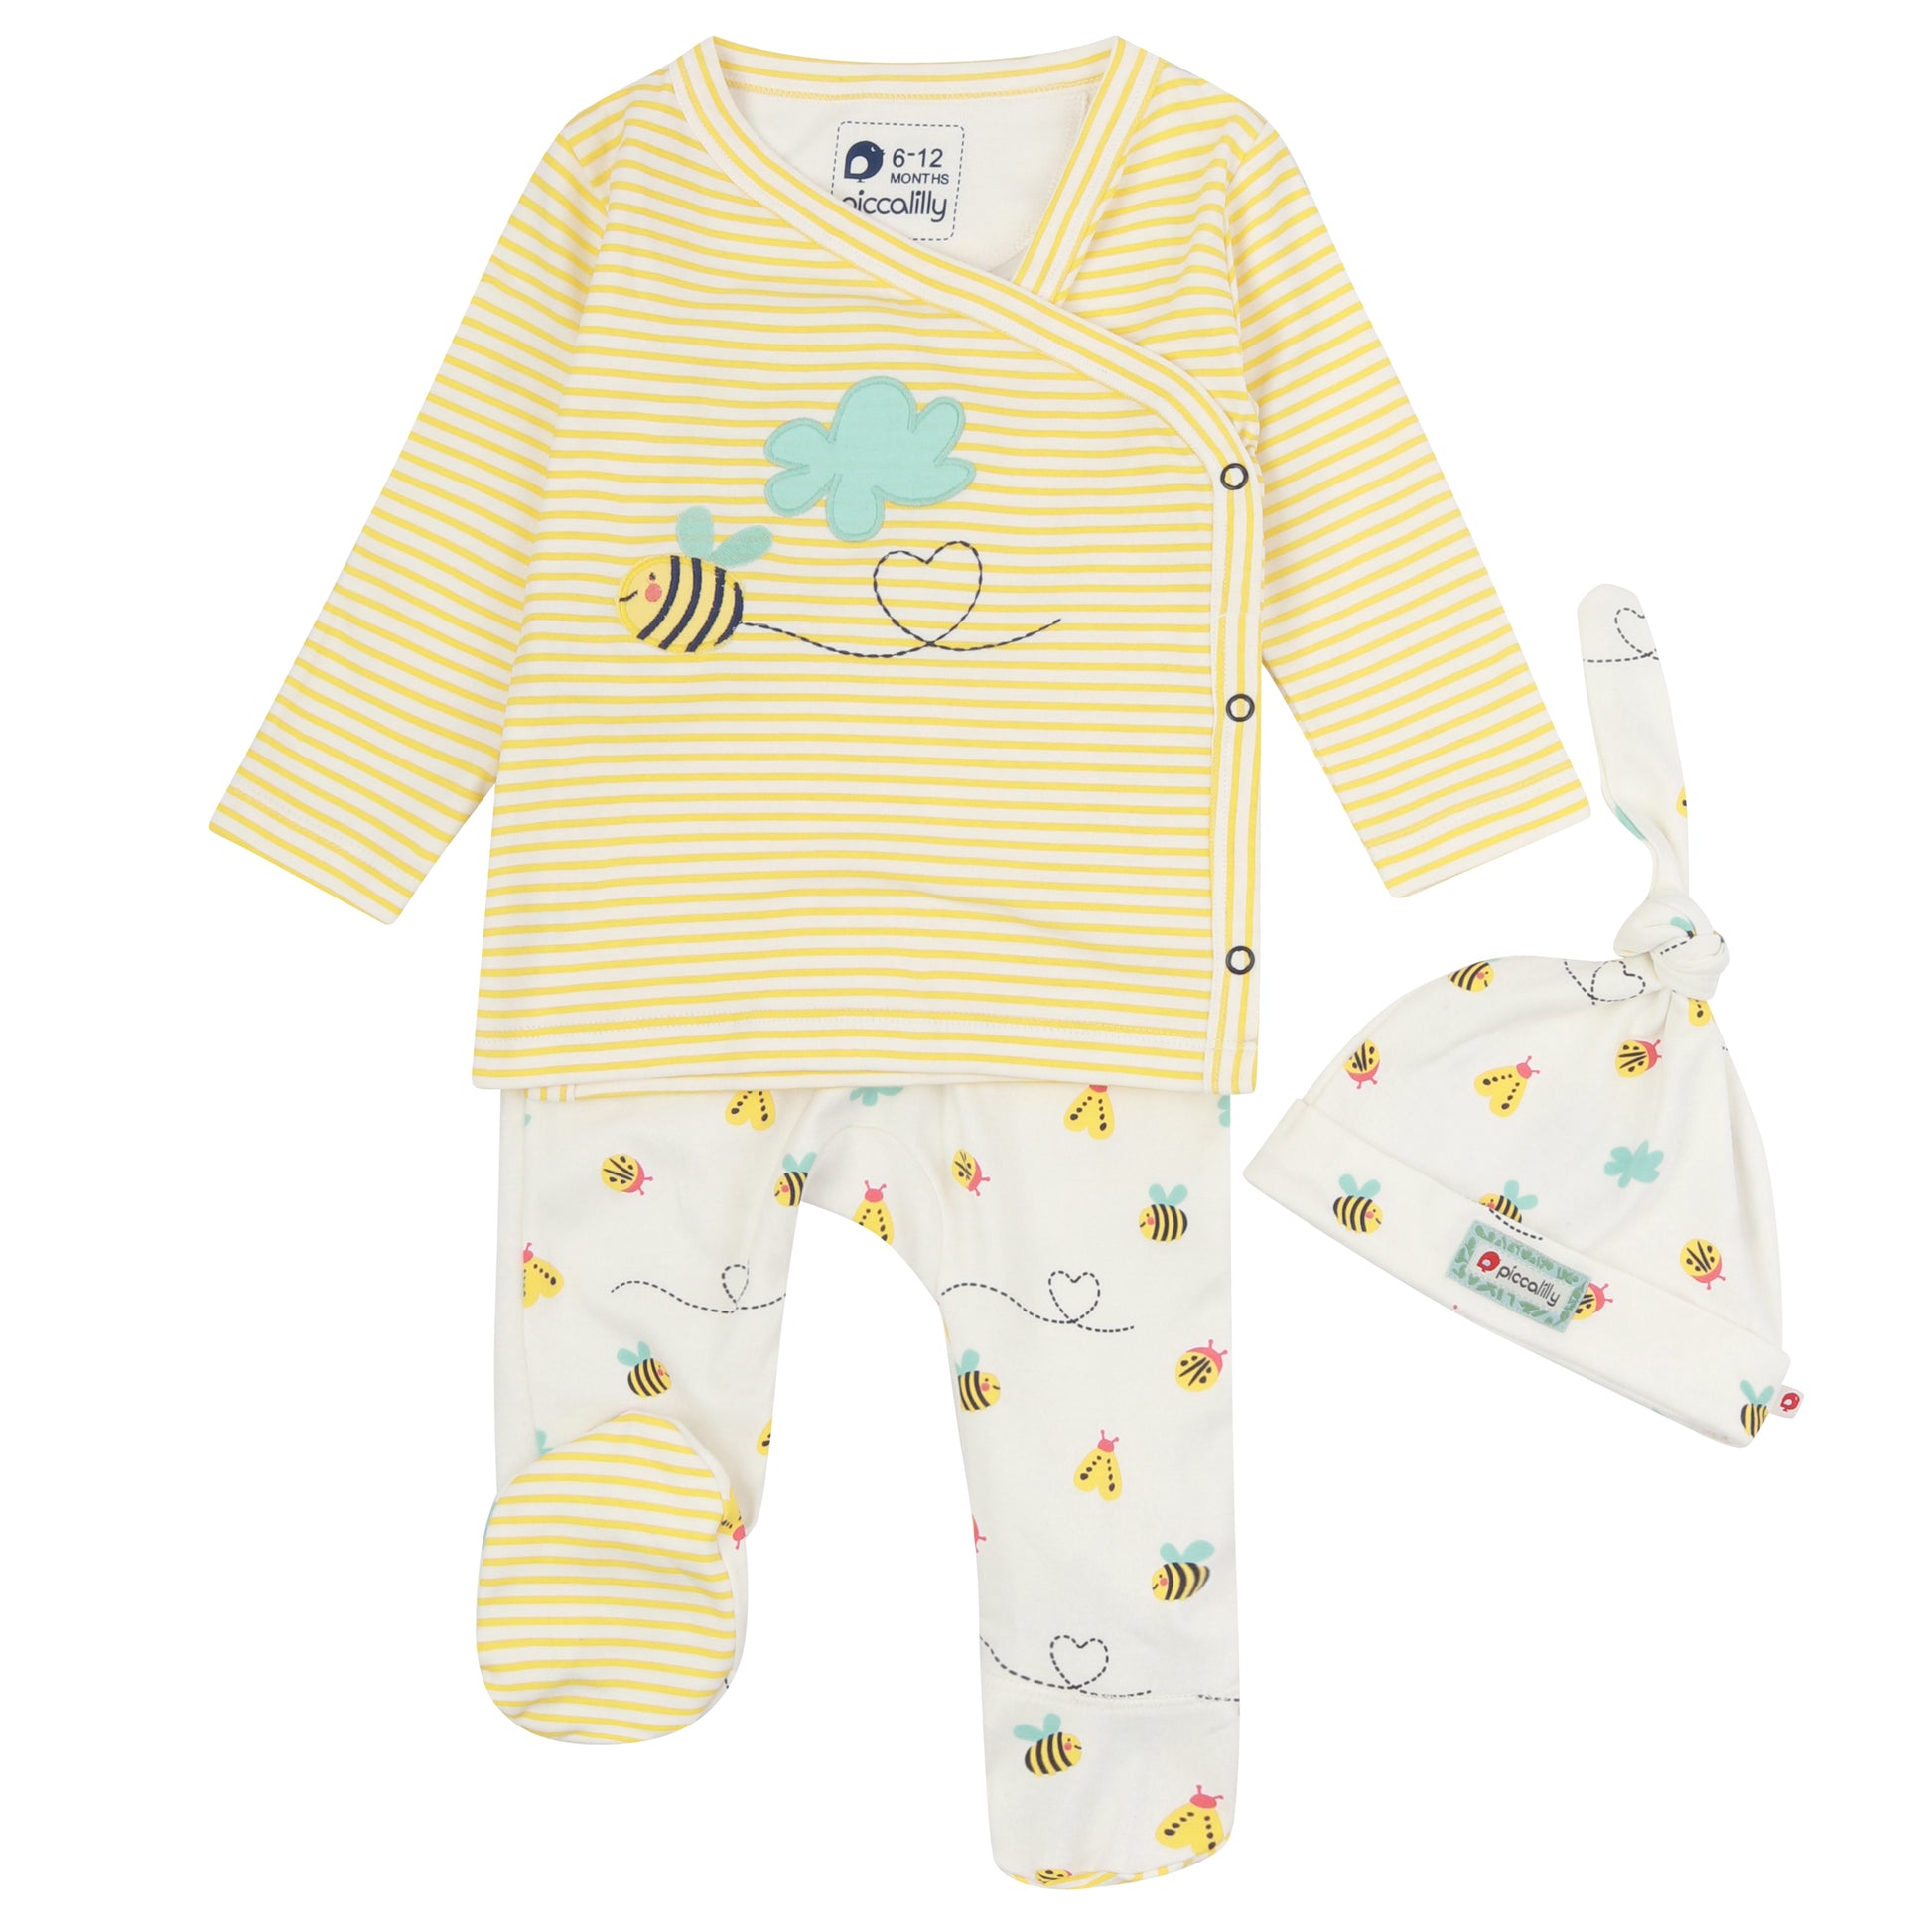 3 piece yellow and white bumblebee set 